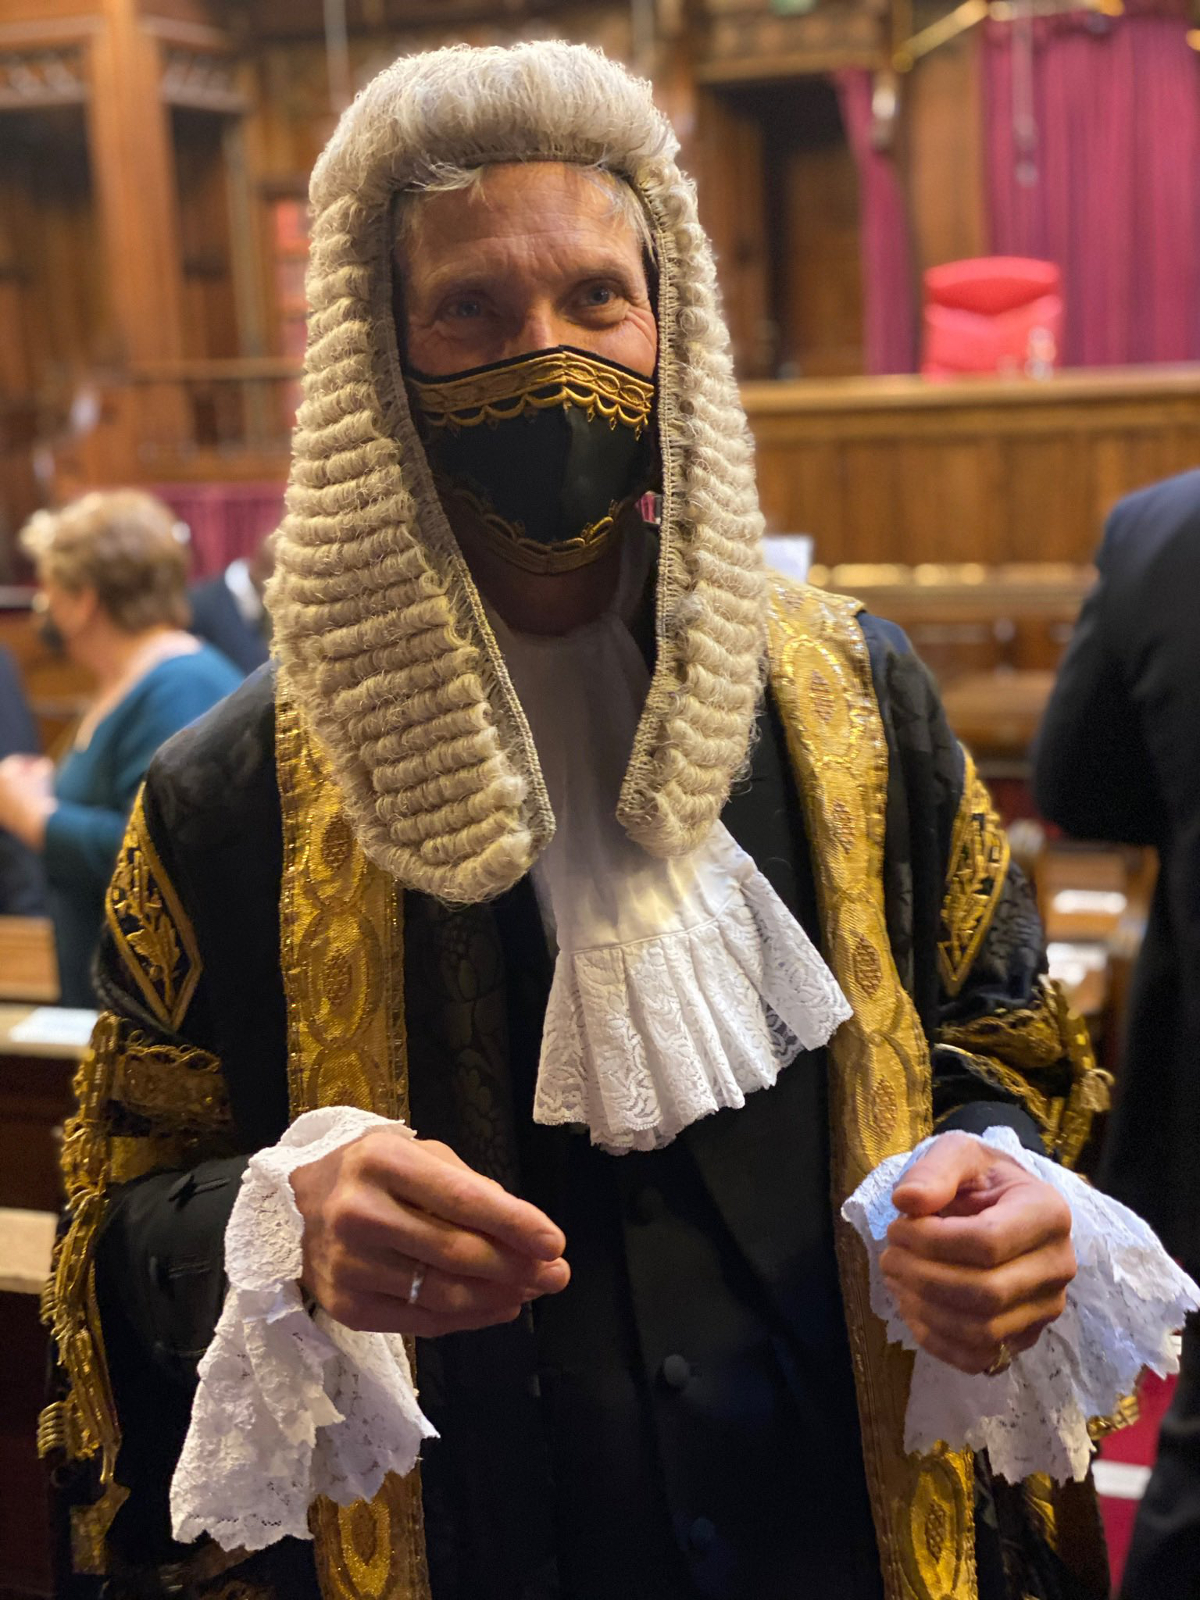 Iudex resartus: Court dress keeps up with the times